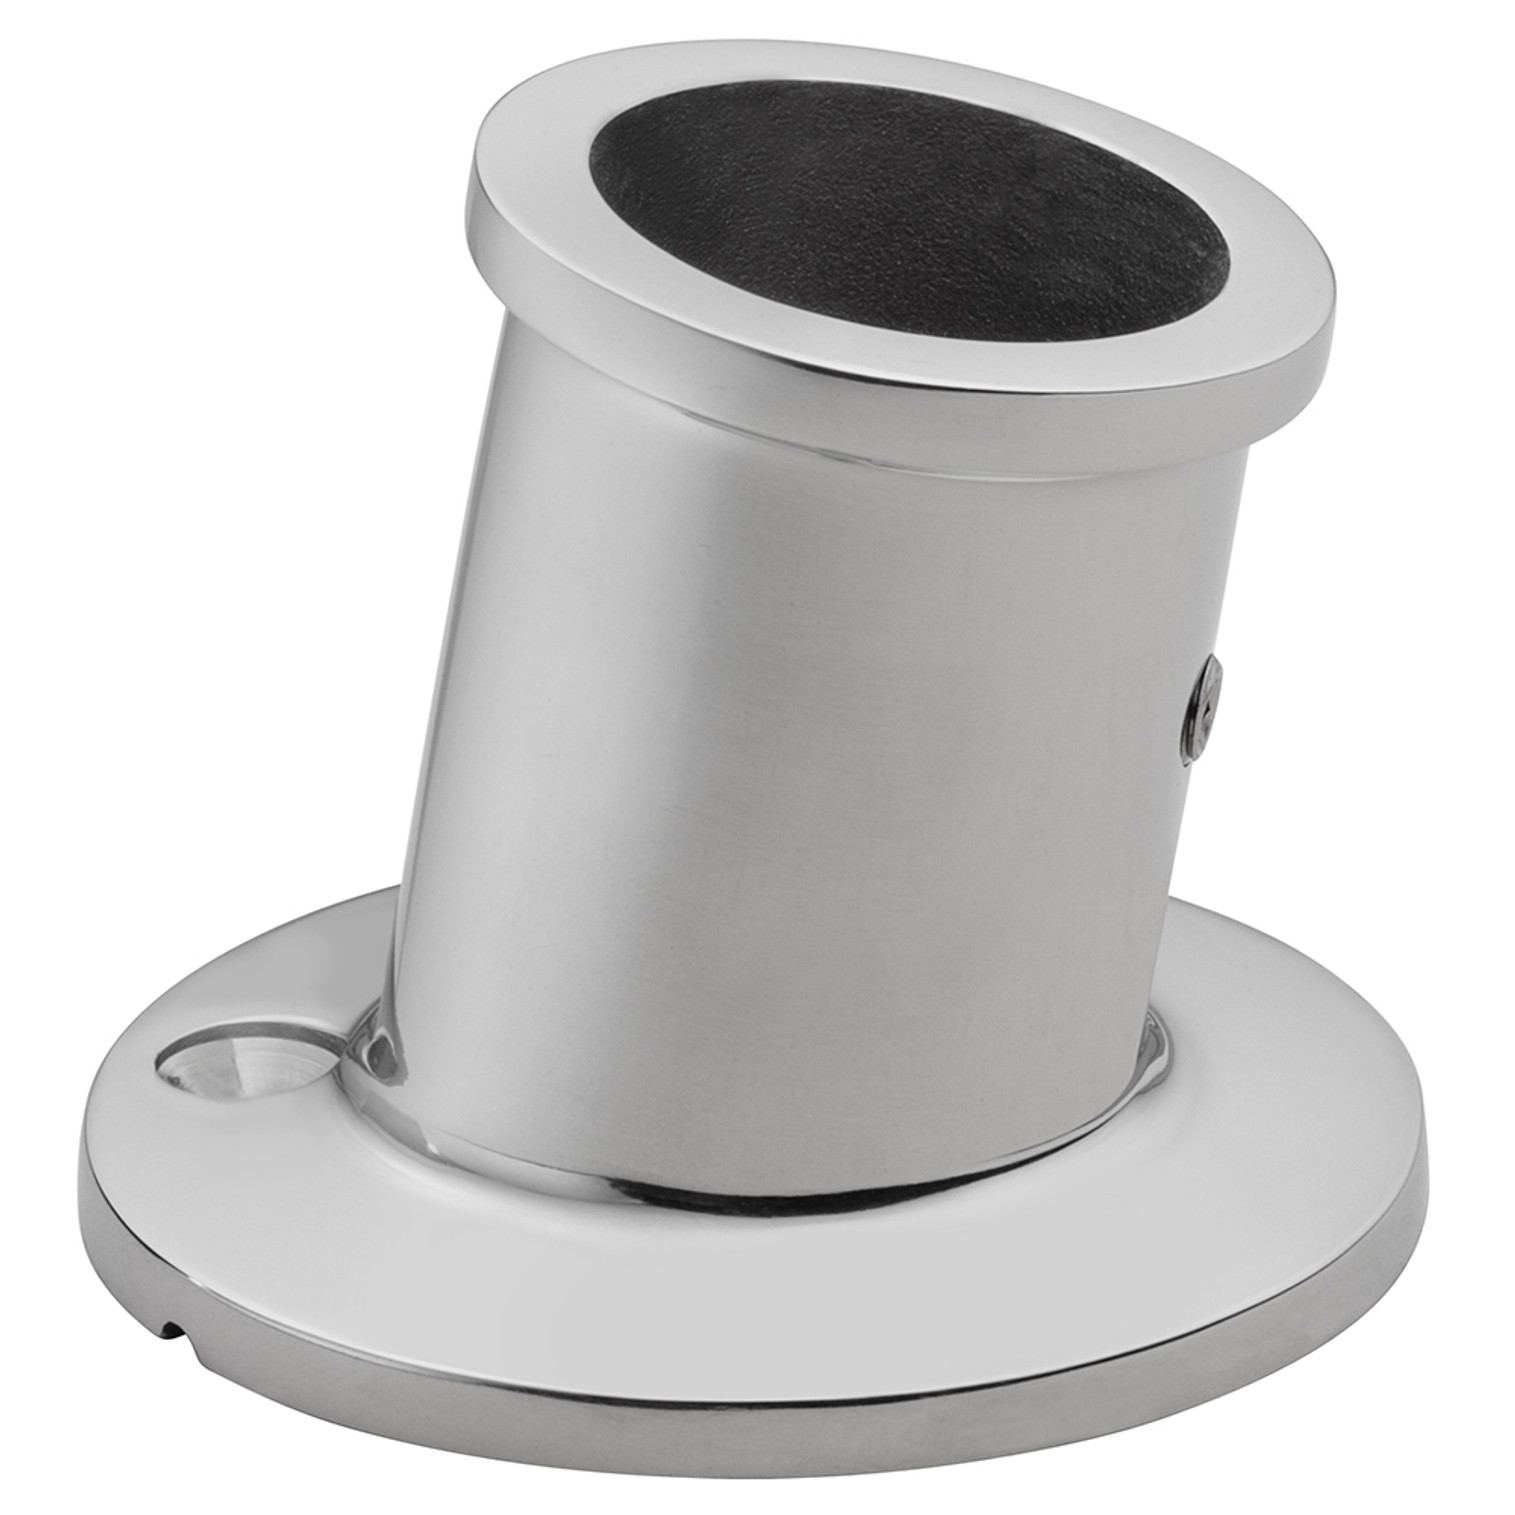 Whitecap Top-Mounted Flag Pole Socket - Stainless Steel - 1" ID